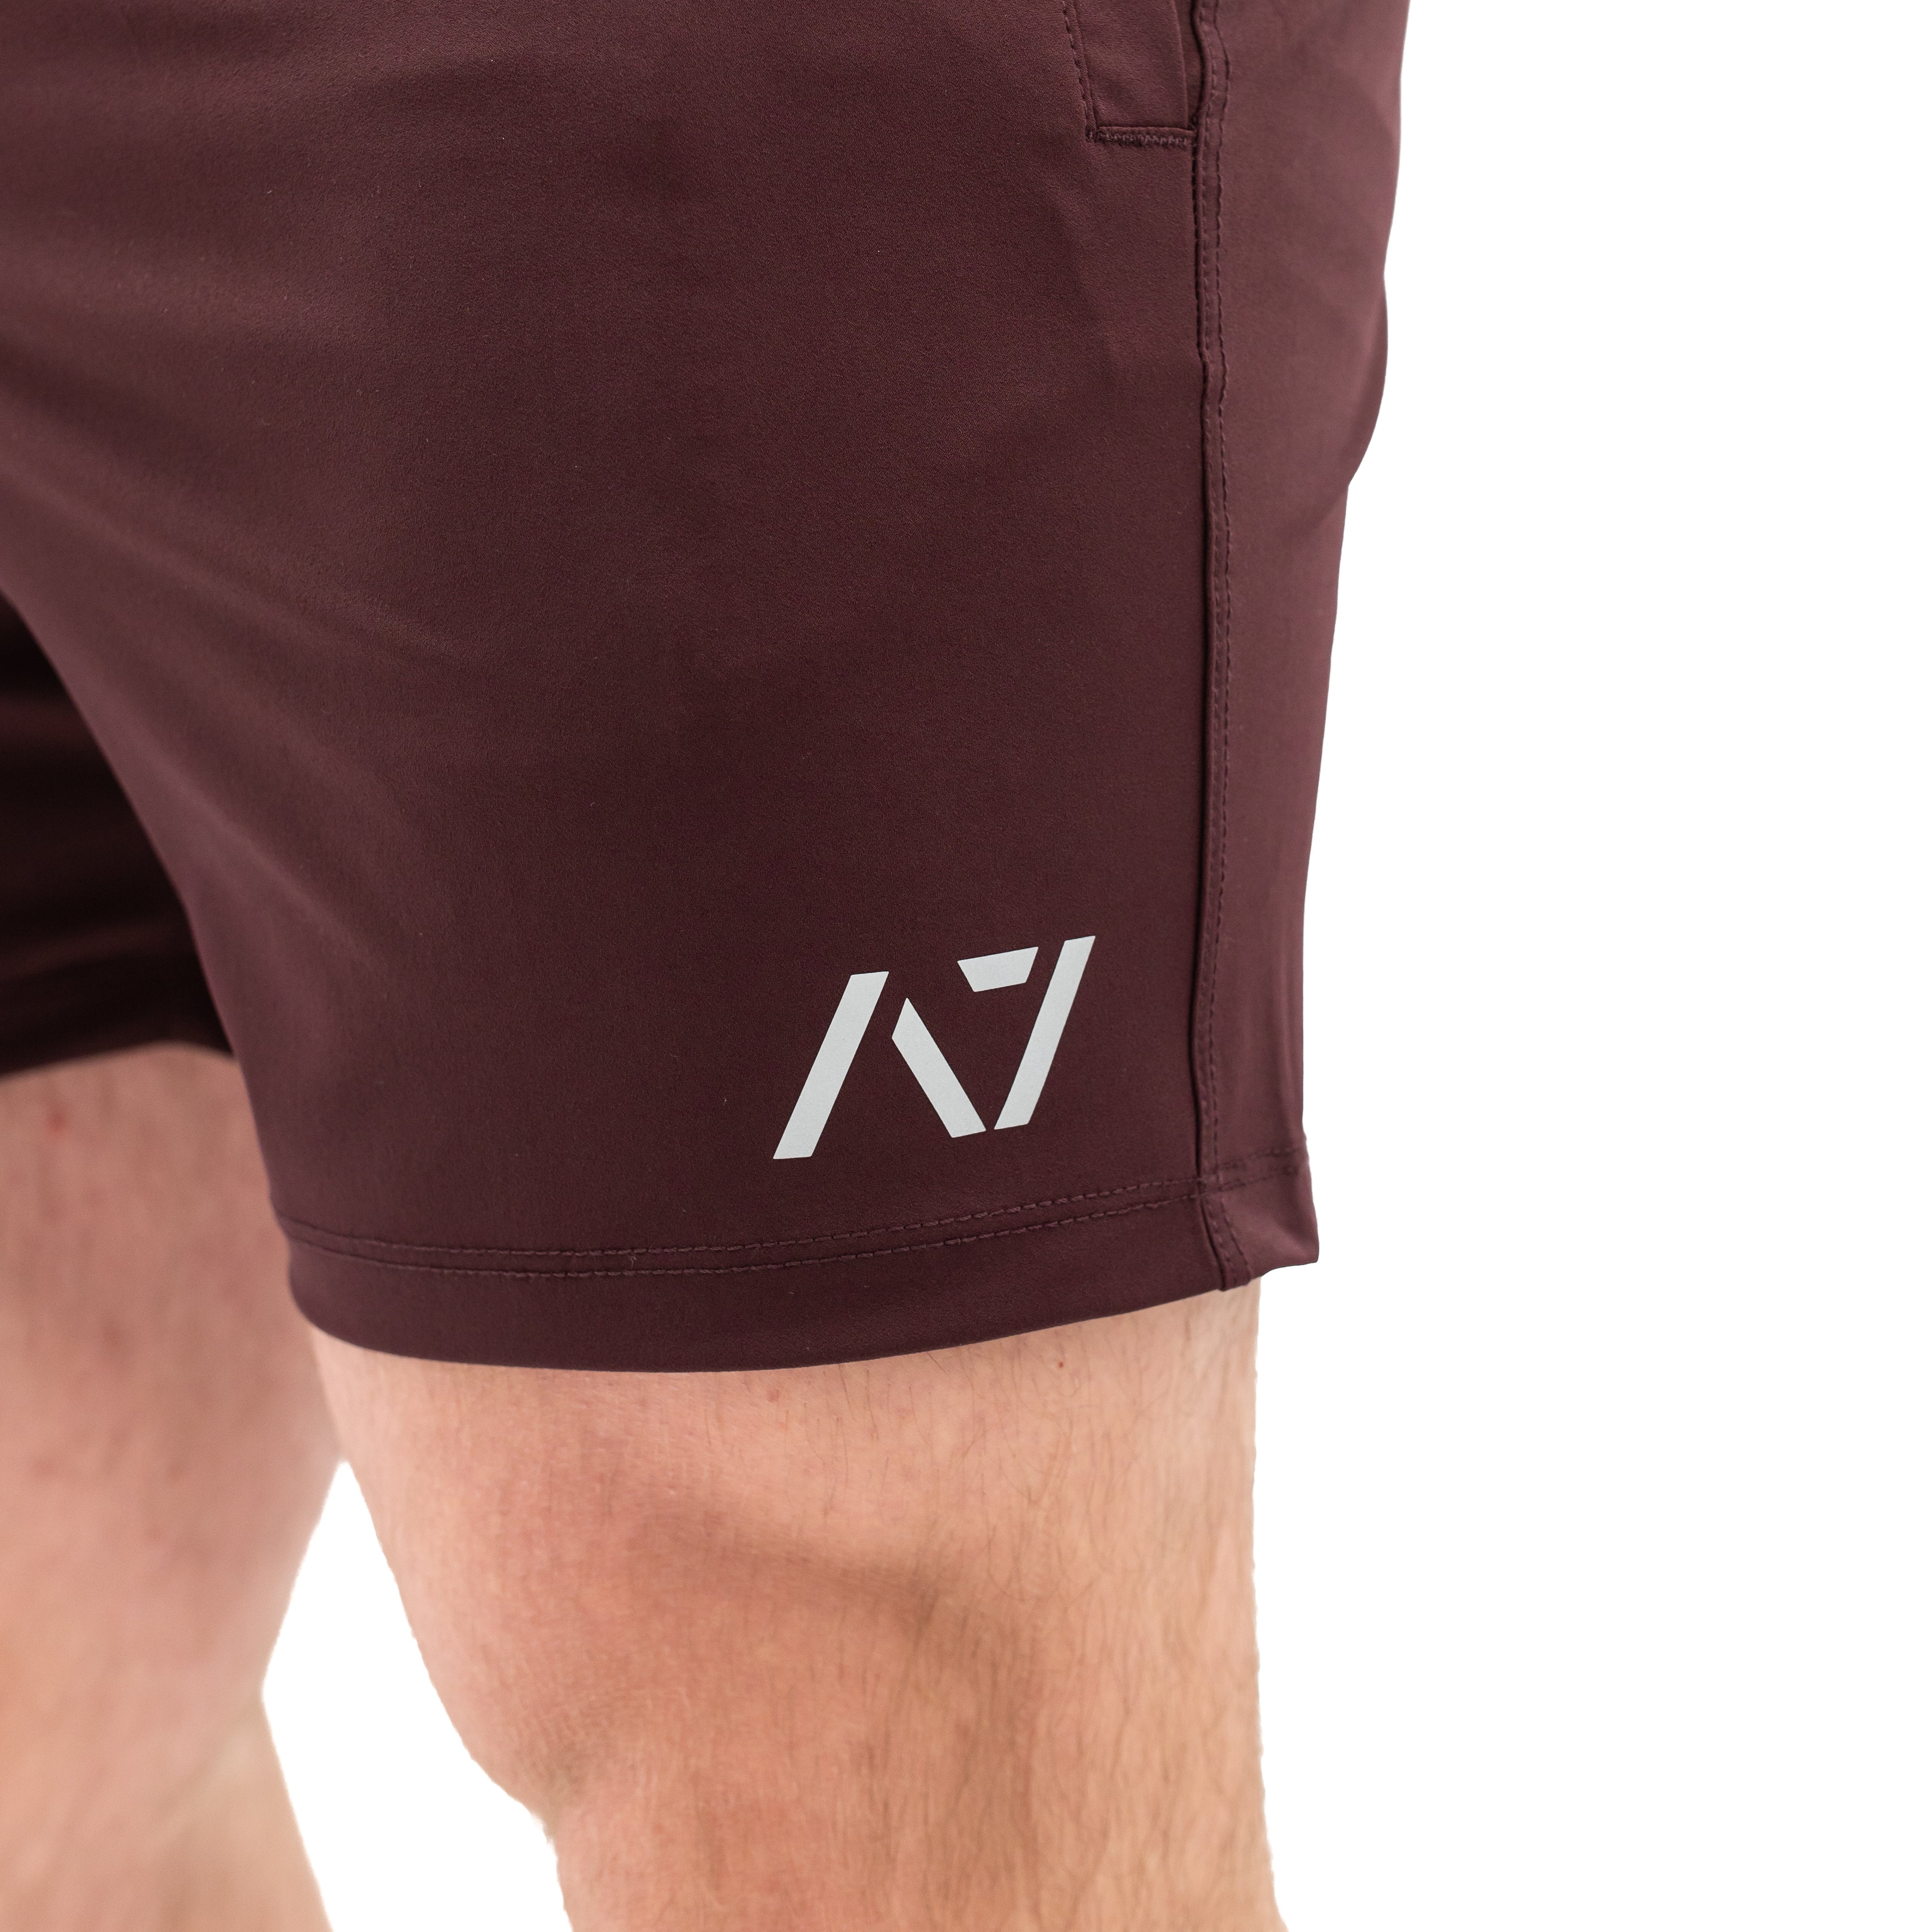 Mahogany 360-GO KWD shorts were created to provide the flexibility for all the movements in your training while offering the comfort and fit you have come to love through our KWD shorts. Purchase 360-GO KWD shorts from A7 UK and A7 Europe. 360-GO KWD shorts are perfect for powerlifting and weightlifting training. Available in UK and Europe including France, Italy, Germany, the Netherlands, Sweden and Poland.